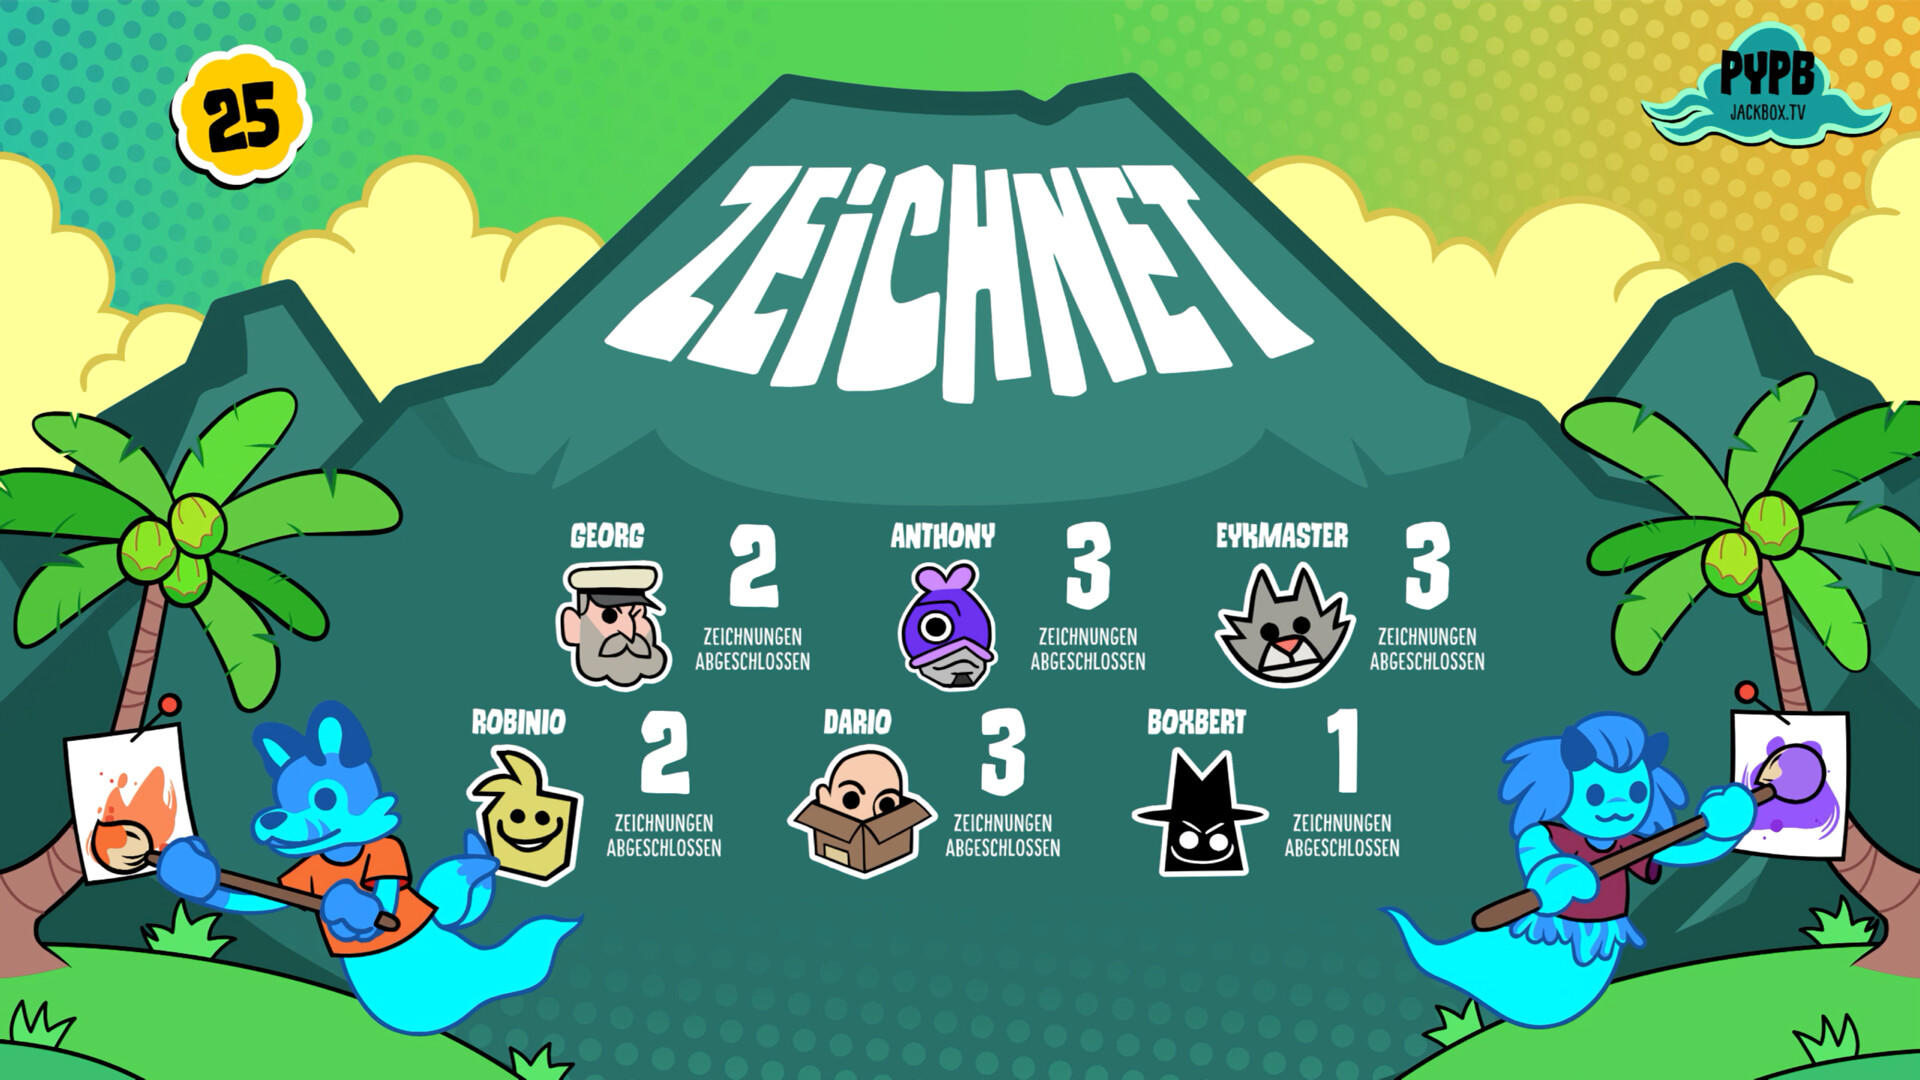 Screenshot 1 of The Jackbox Party Pack 10 